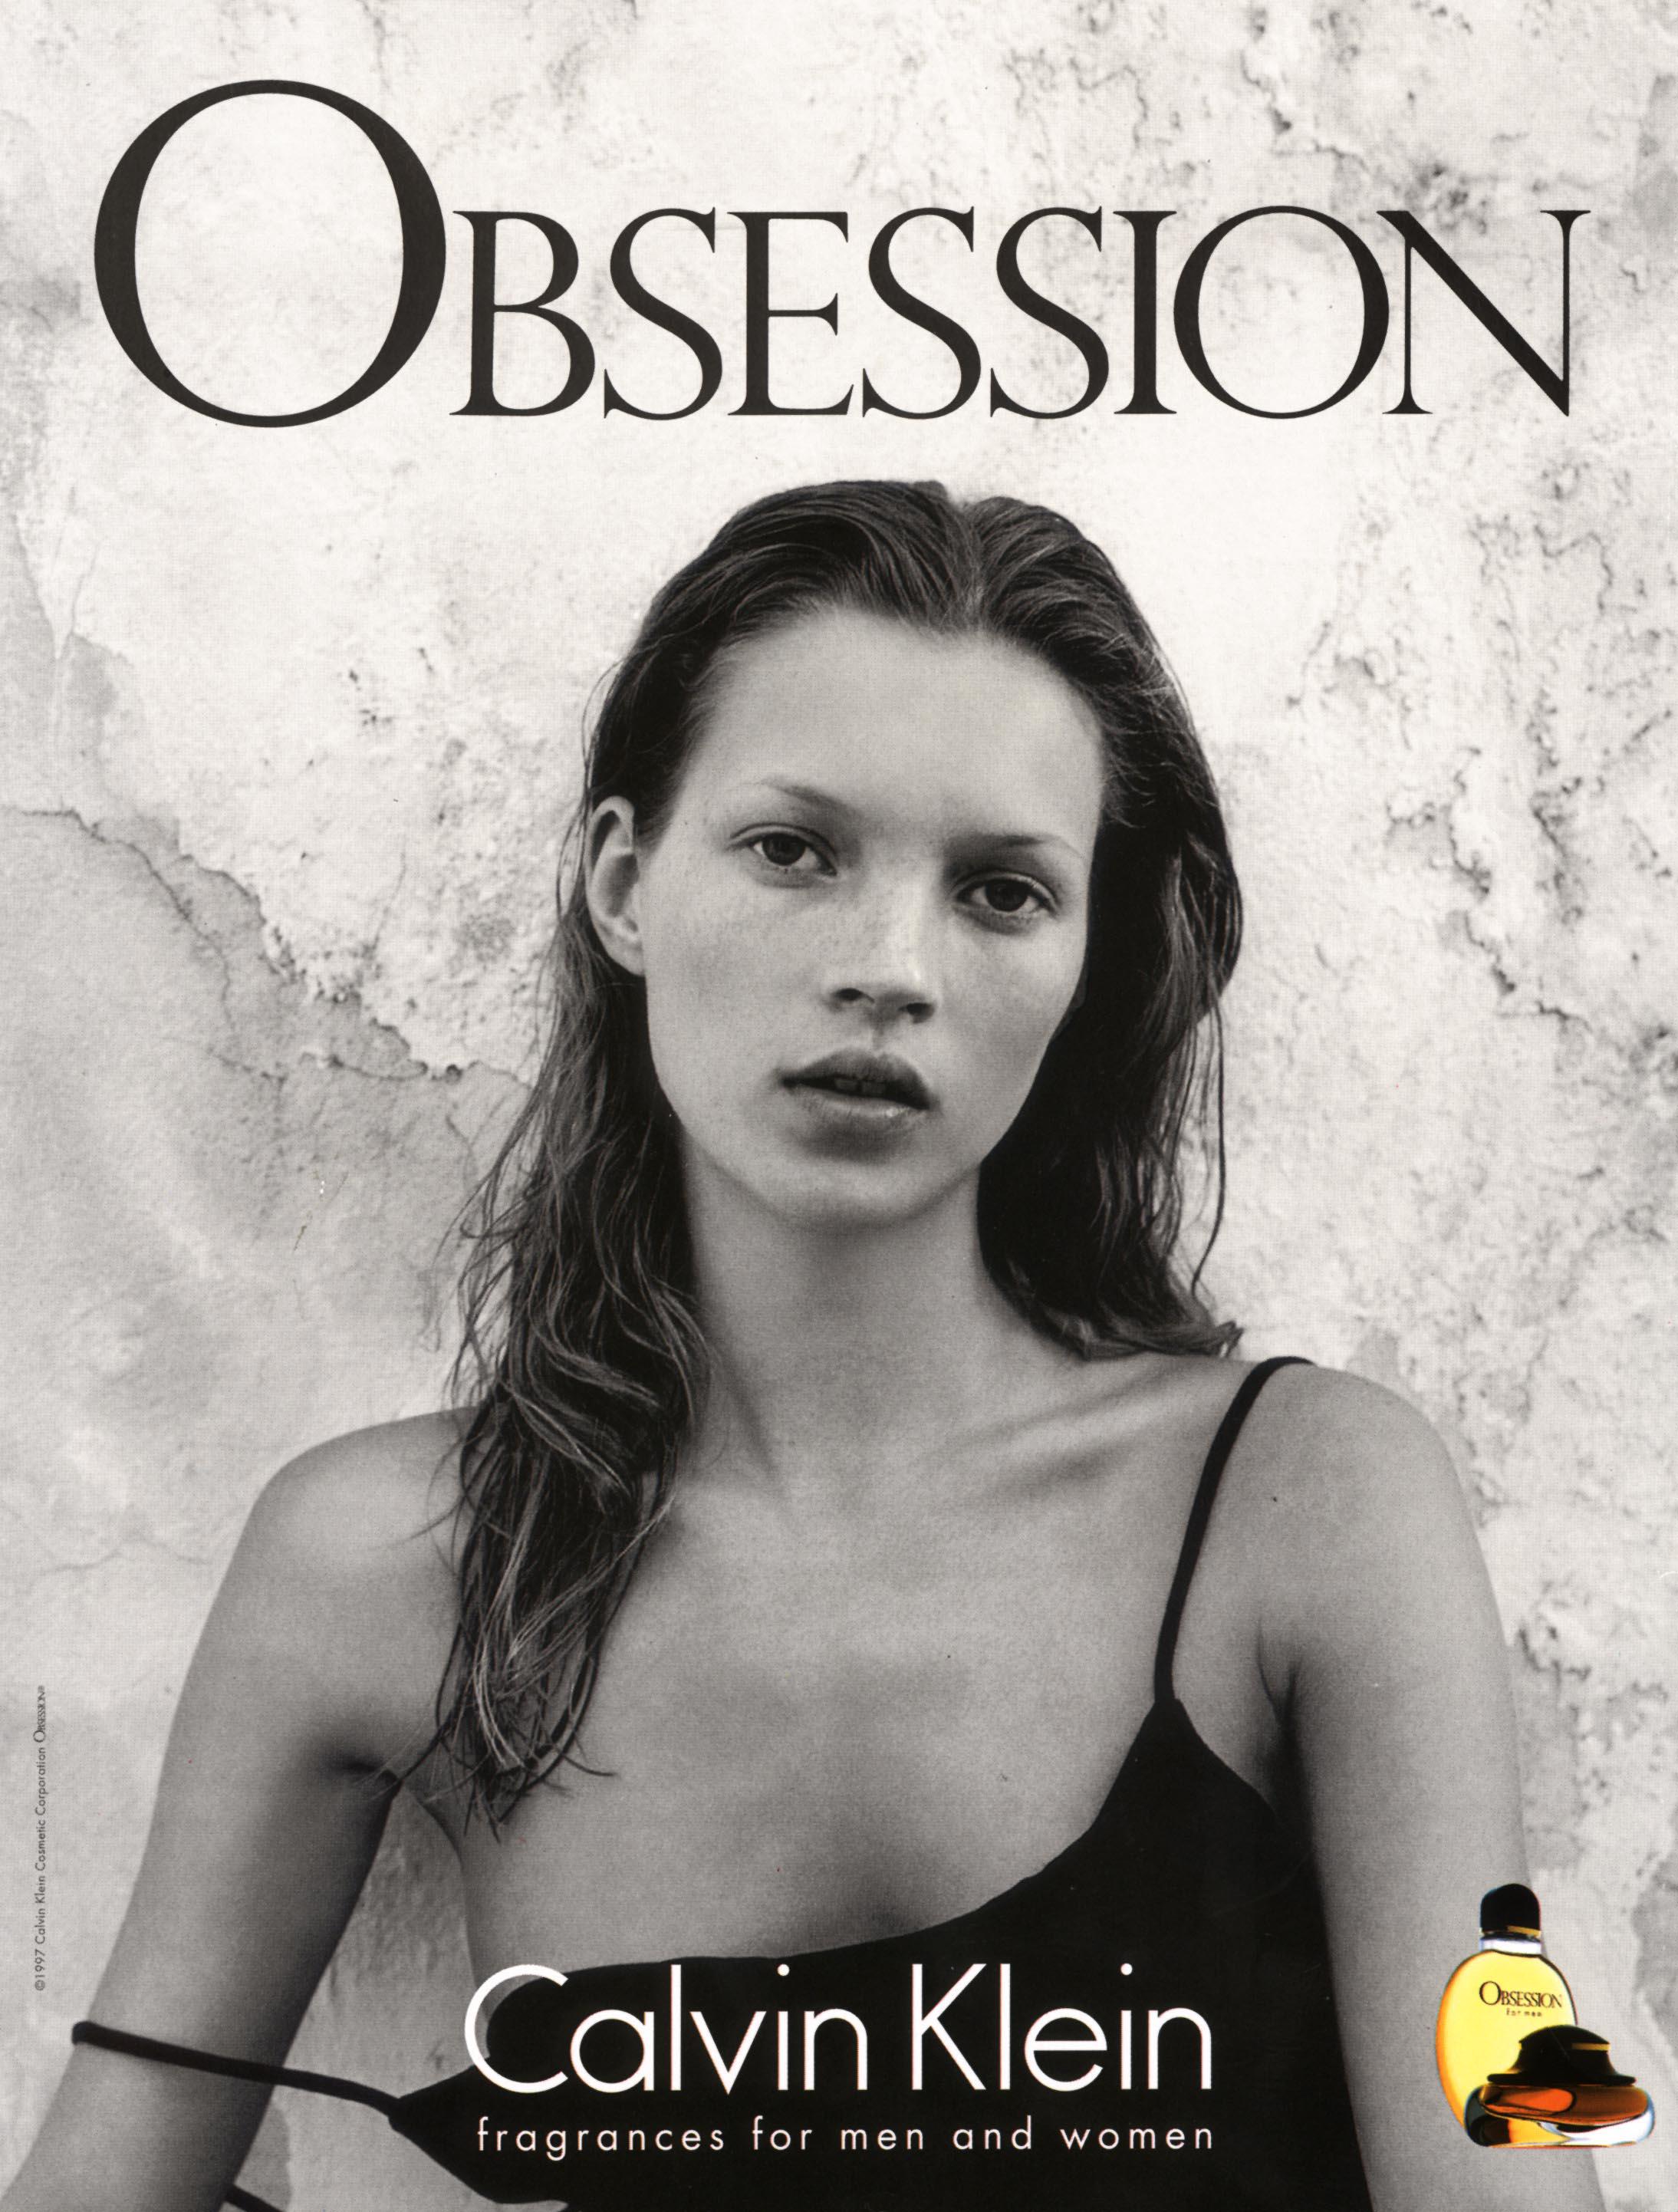 Kate Moss at 50: the model's Calvin Klein campaigns were sleazy